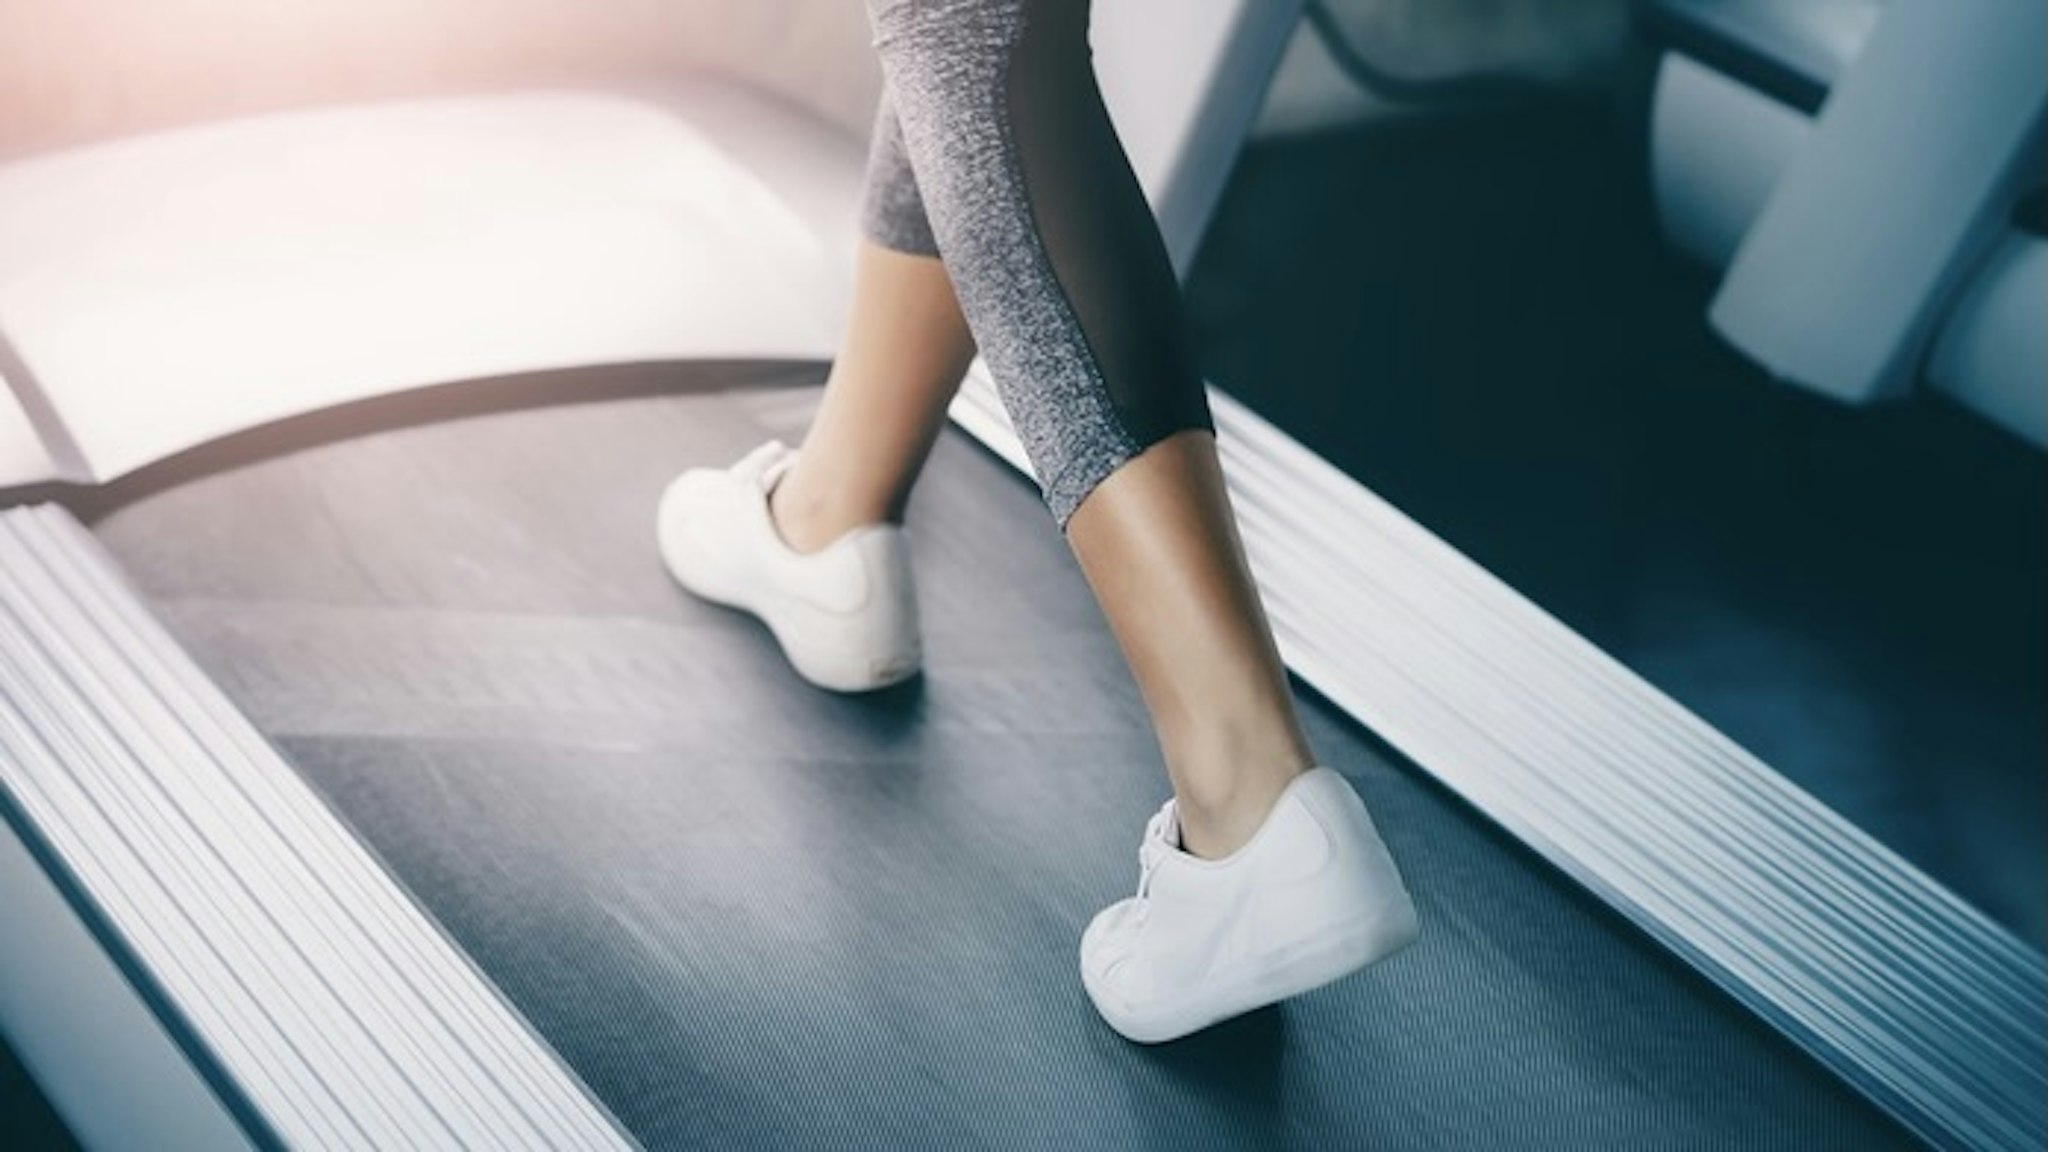 Indoor runner legs is walking slowly on the treadmill for light exercise closed up shot. - stock photo Indoor runner legs is walking slowly on the treadmill for light exercise closed up shot. junce via Getty Images